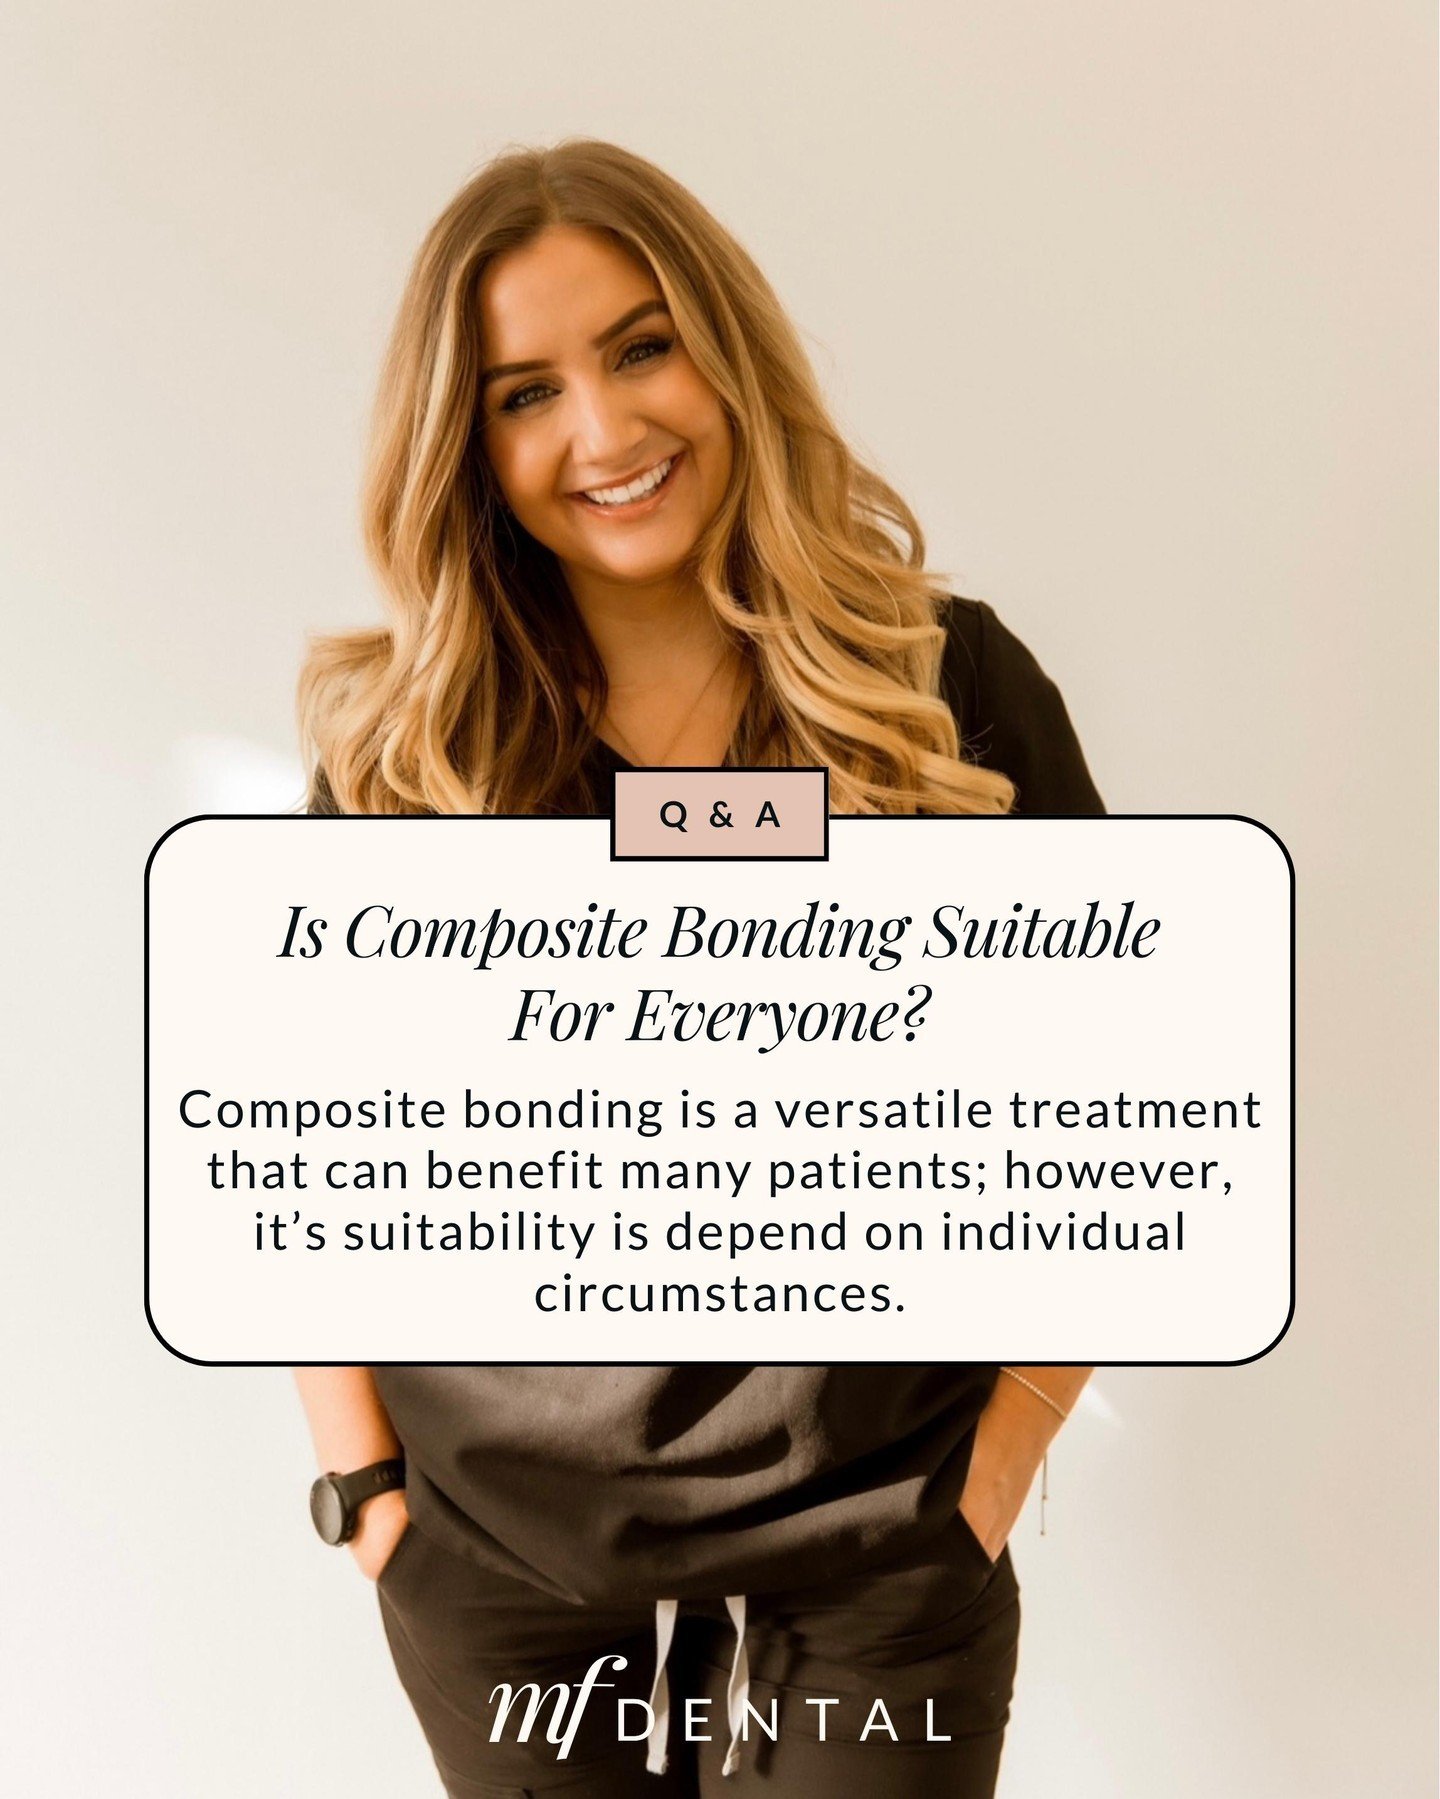 Composite bonding is a versatile treatment that can benefit many patients; however, it&rsquo;s suitability is depend on individual circumstances. 

Our dental team will assess your oral health, the condition of your teeth, and discuss your specific g